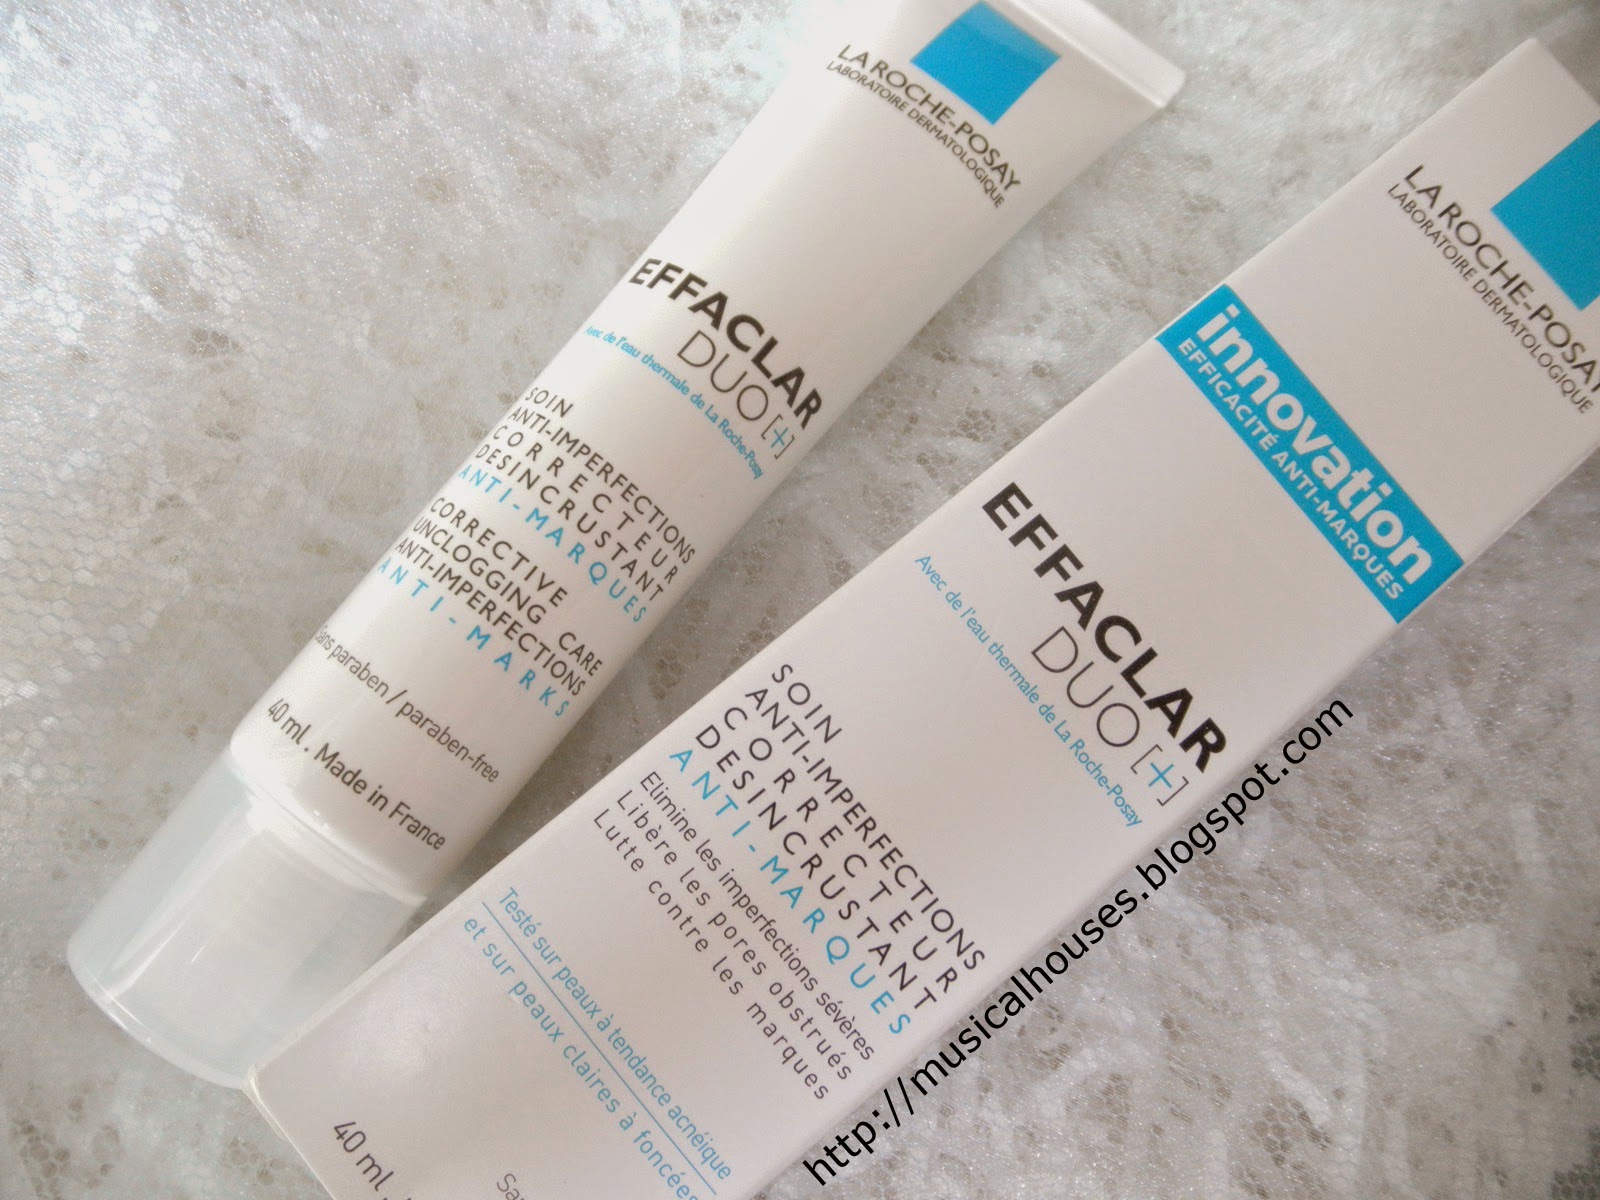 La Roche Posay Effaclar Duo + Anti-Blemish Cream Review and Ingredients Analysis - of Faces Fingers